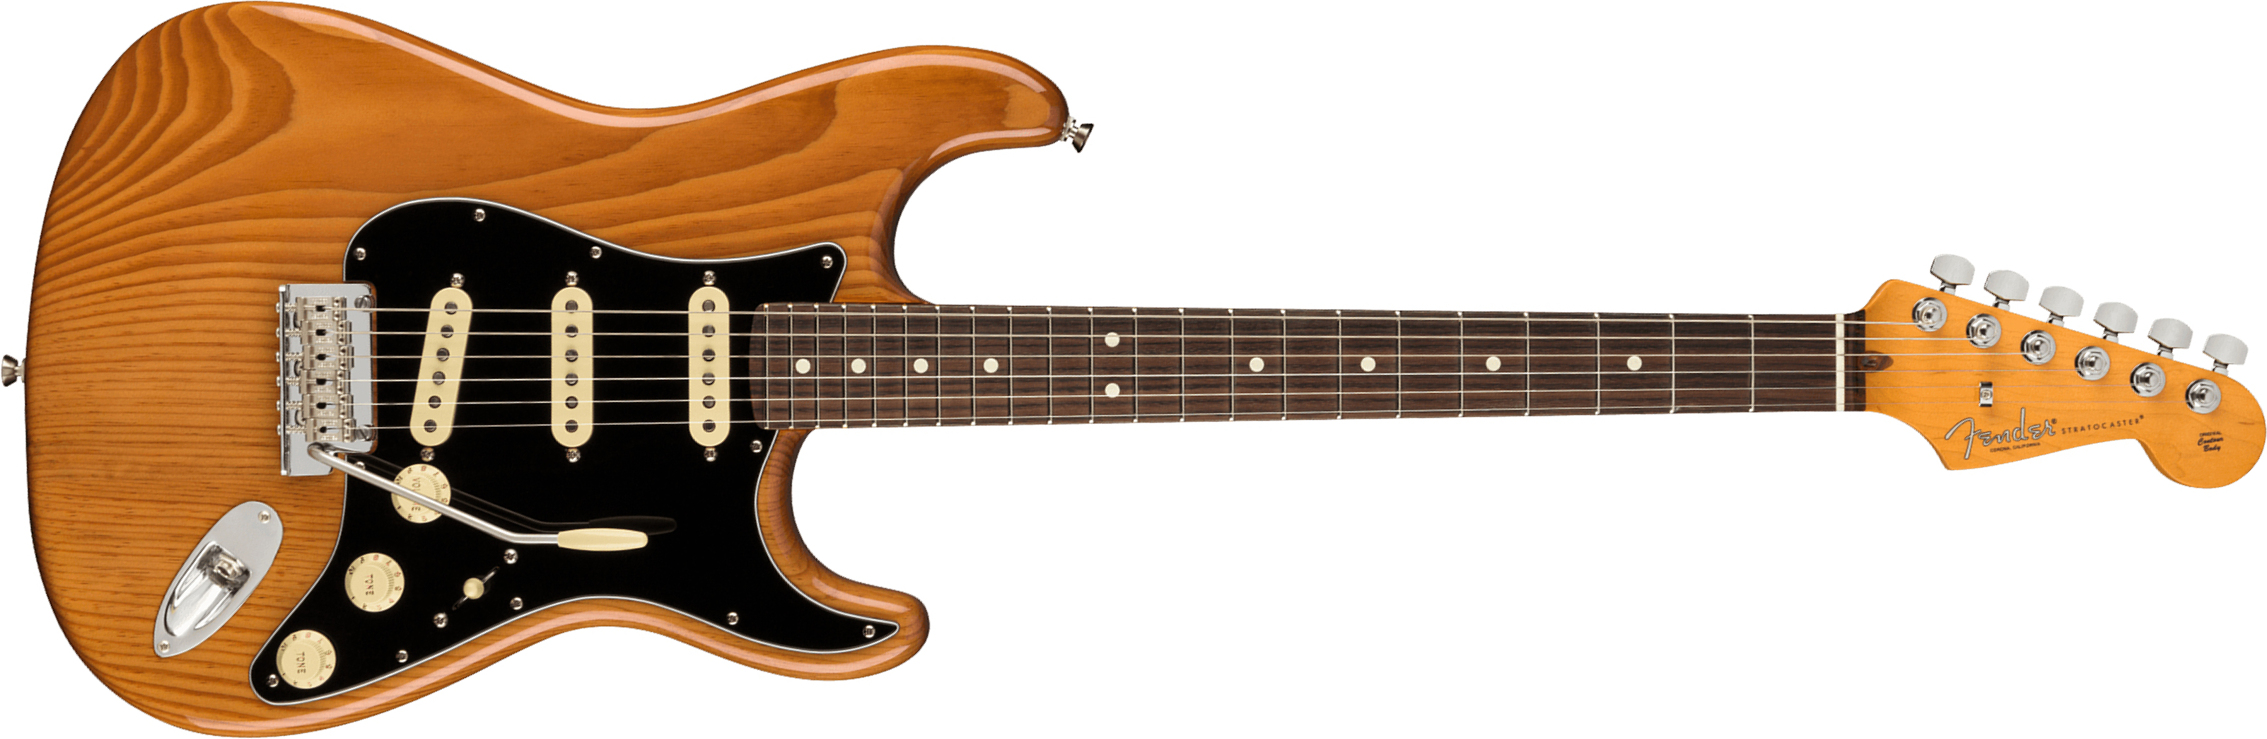 Fender Strat American Professional Ii Usa Rw - Roasted Pine - Guitare Électrique Forme Str - Main picture